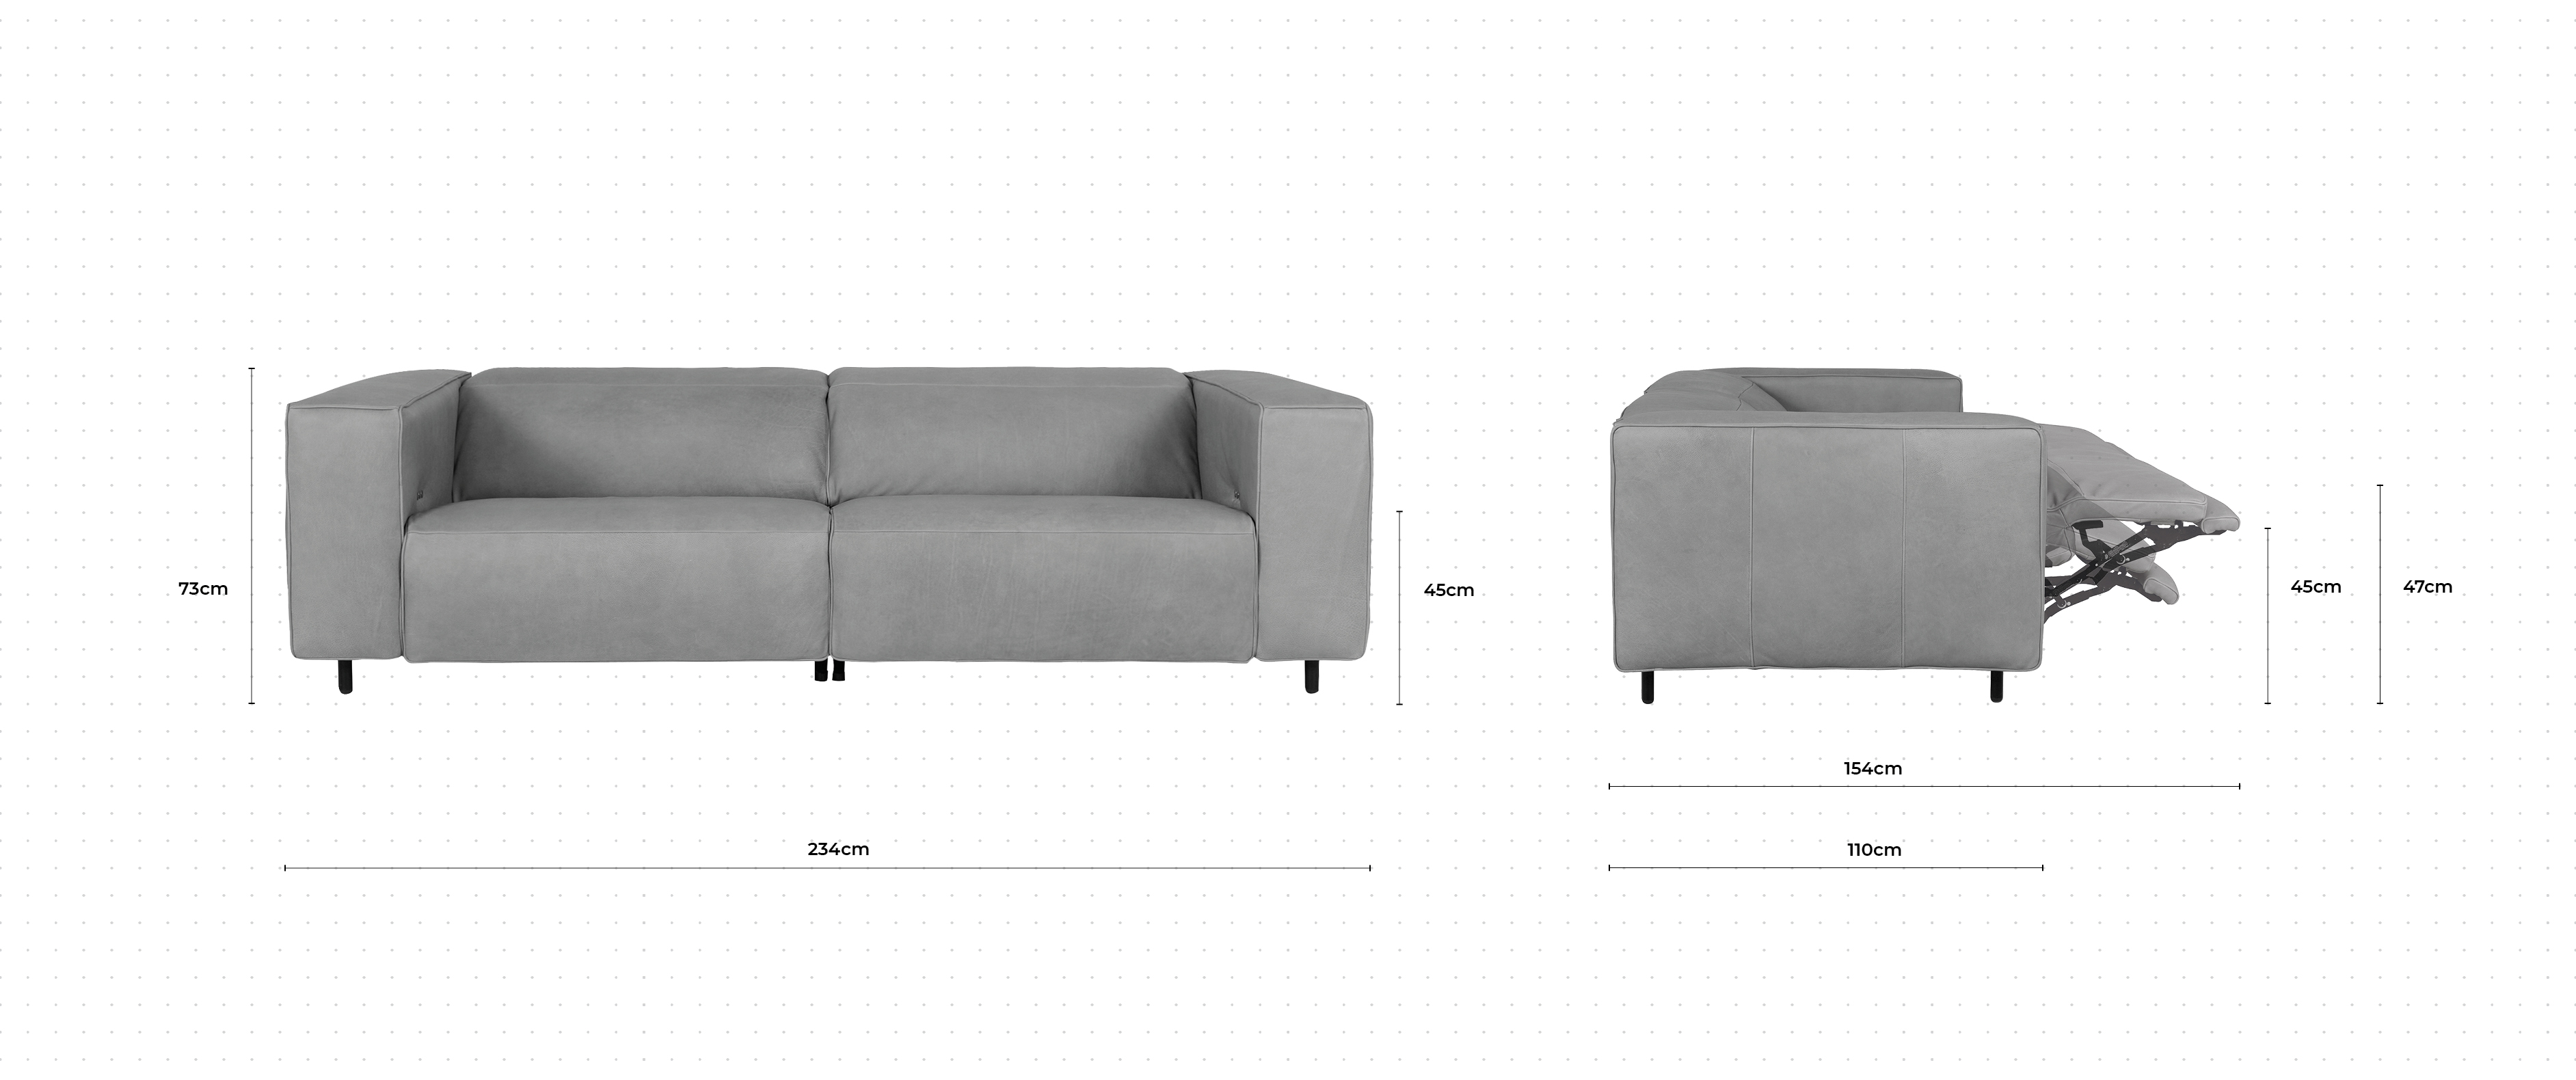 Eastwood 3 Seater Sofa dimensions